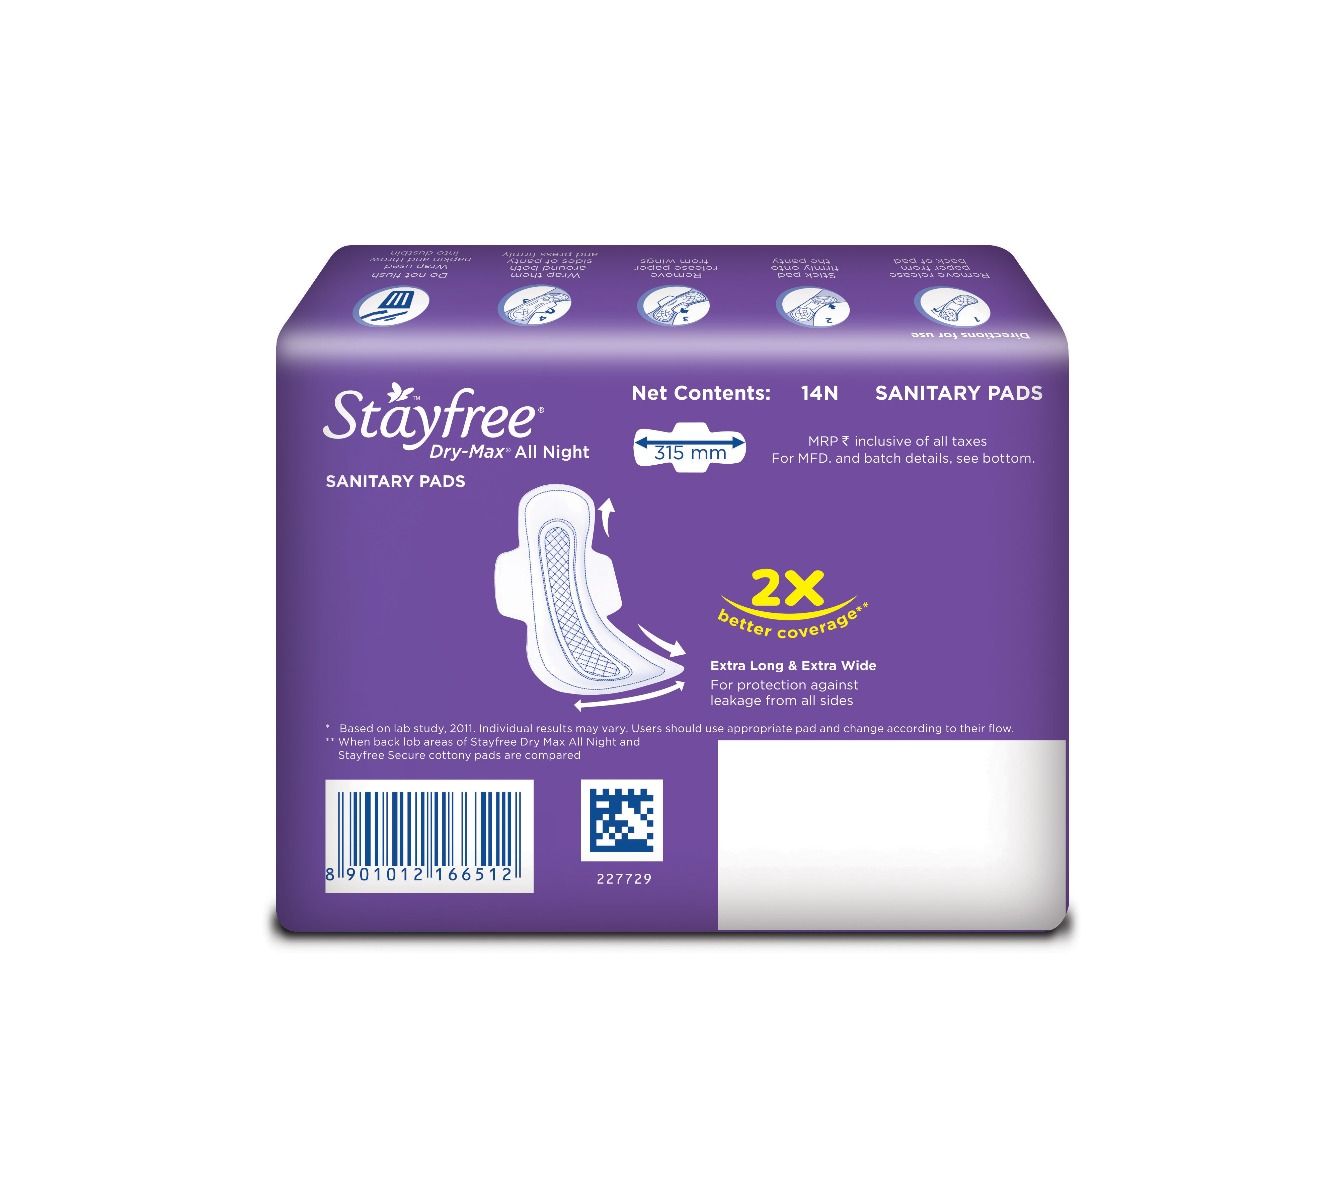 Stayfree Dry-Max All Night Ultra-Dry Pads With Wings XL, 14 Count, Pack of 1 